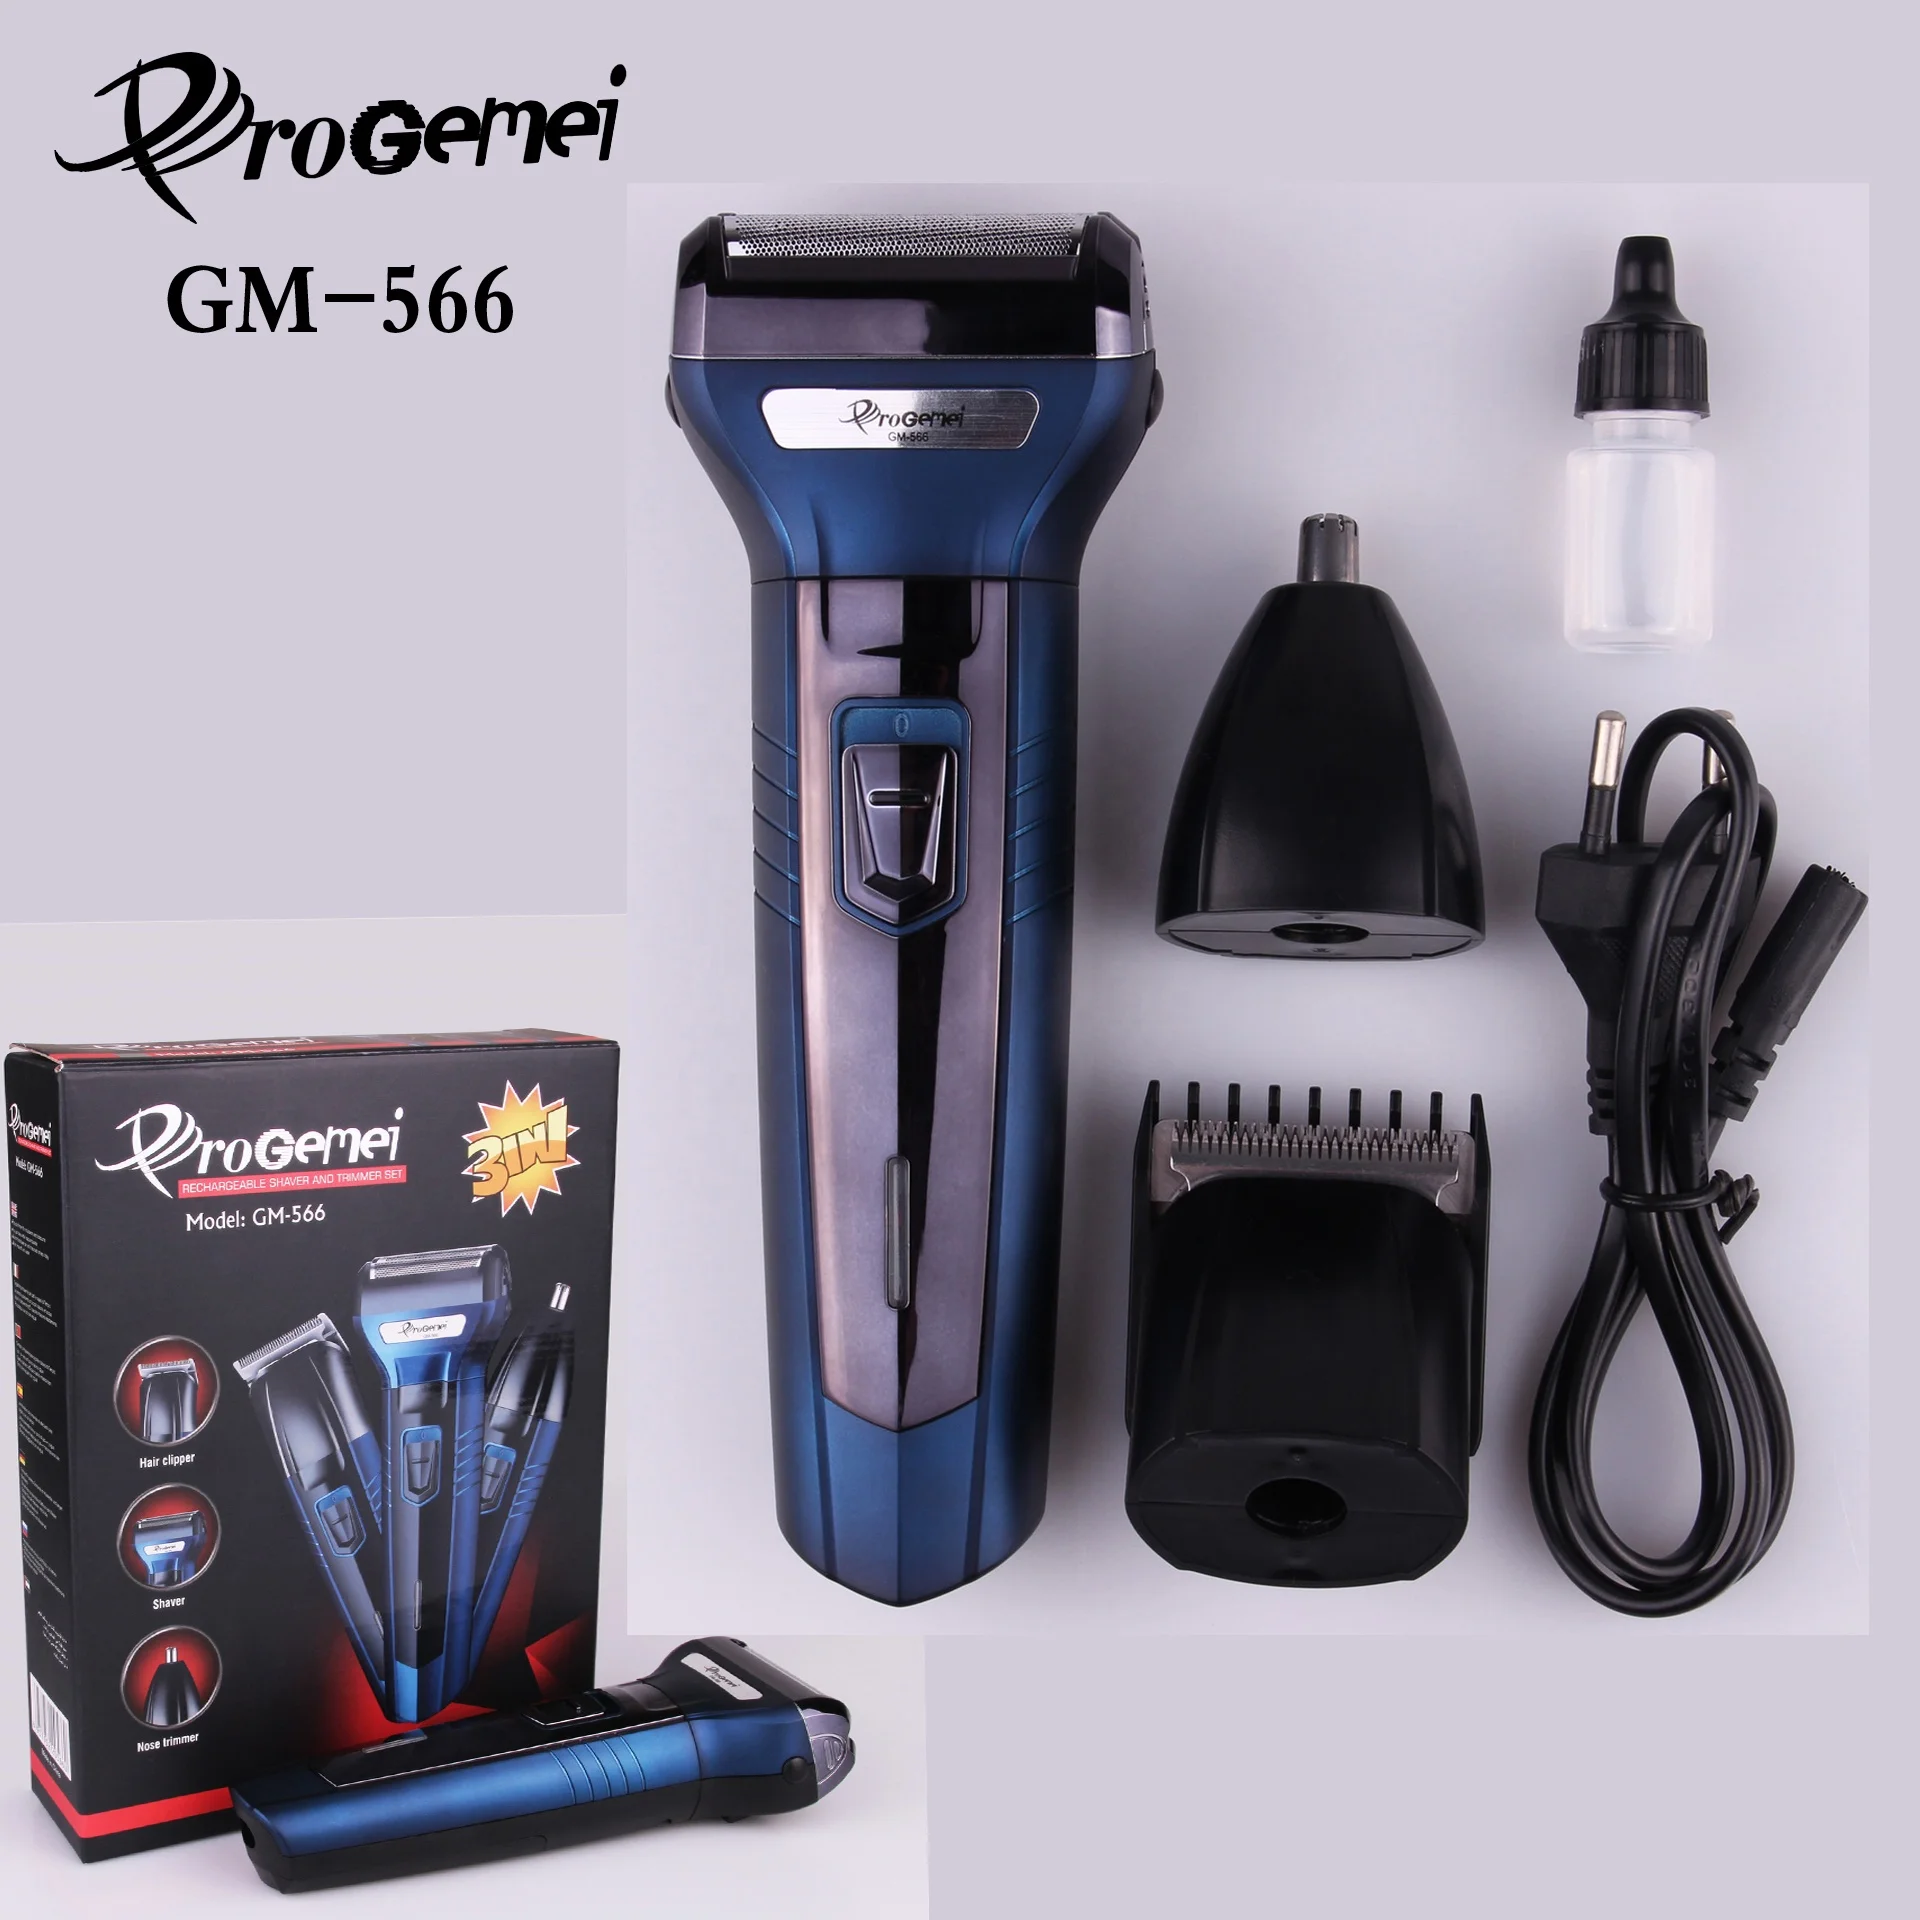 best trimmer for beard and body